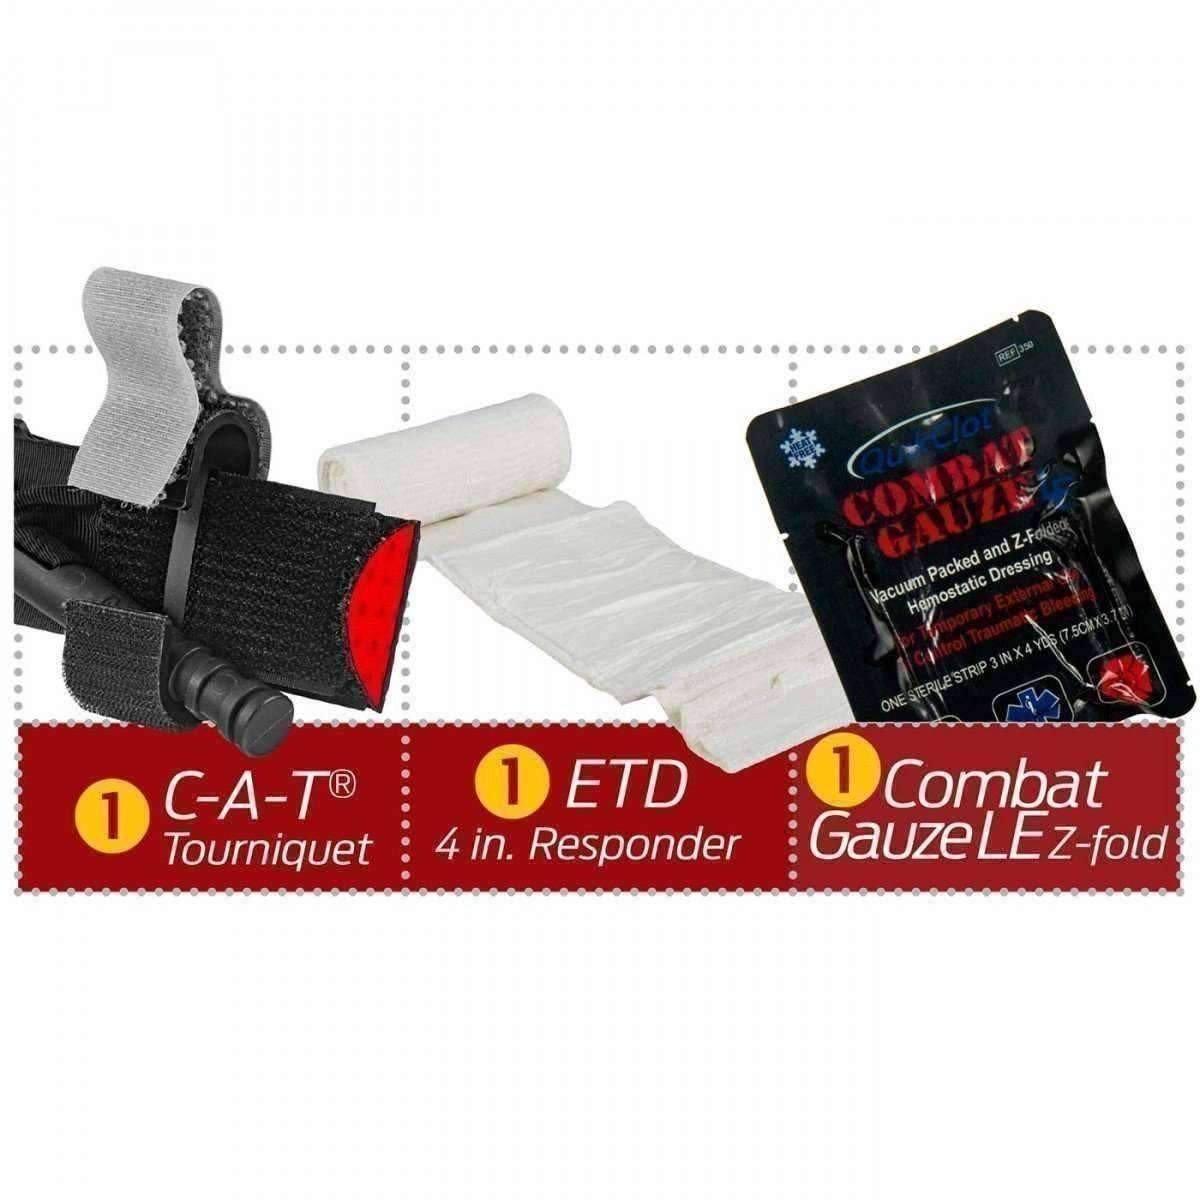 Compact Officer Response Emergency Kit (CORE) - Vendor